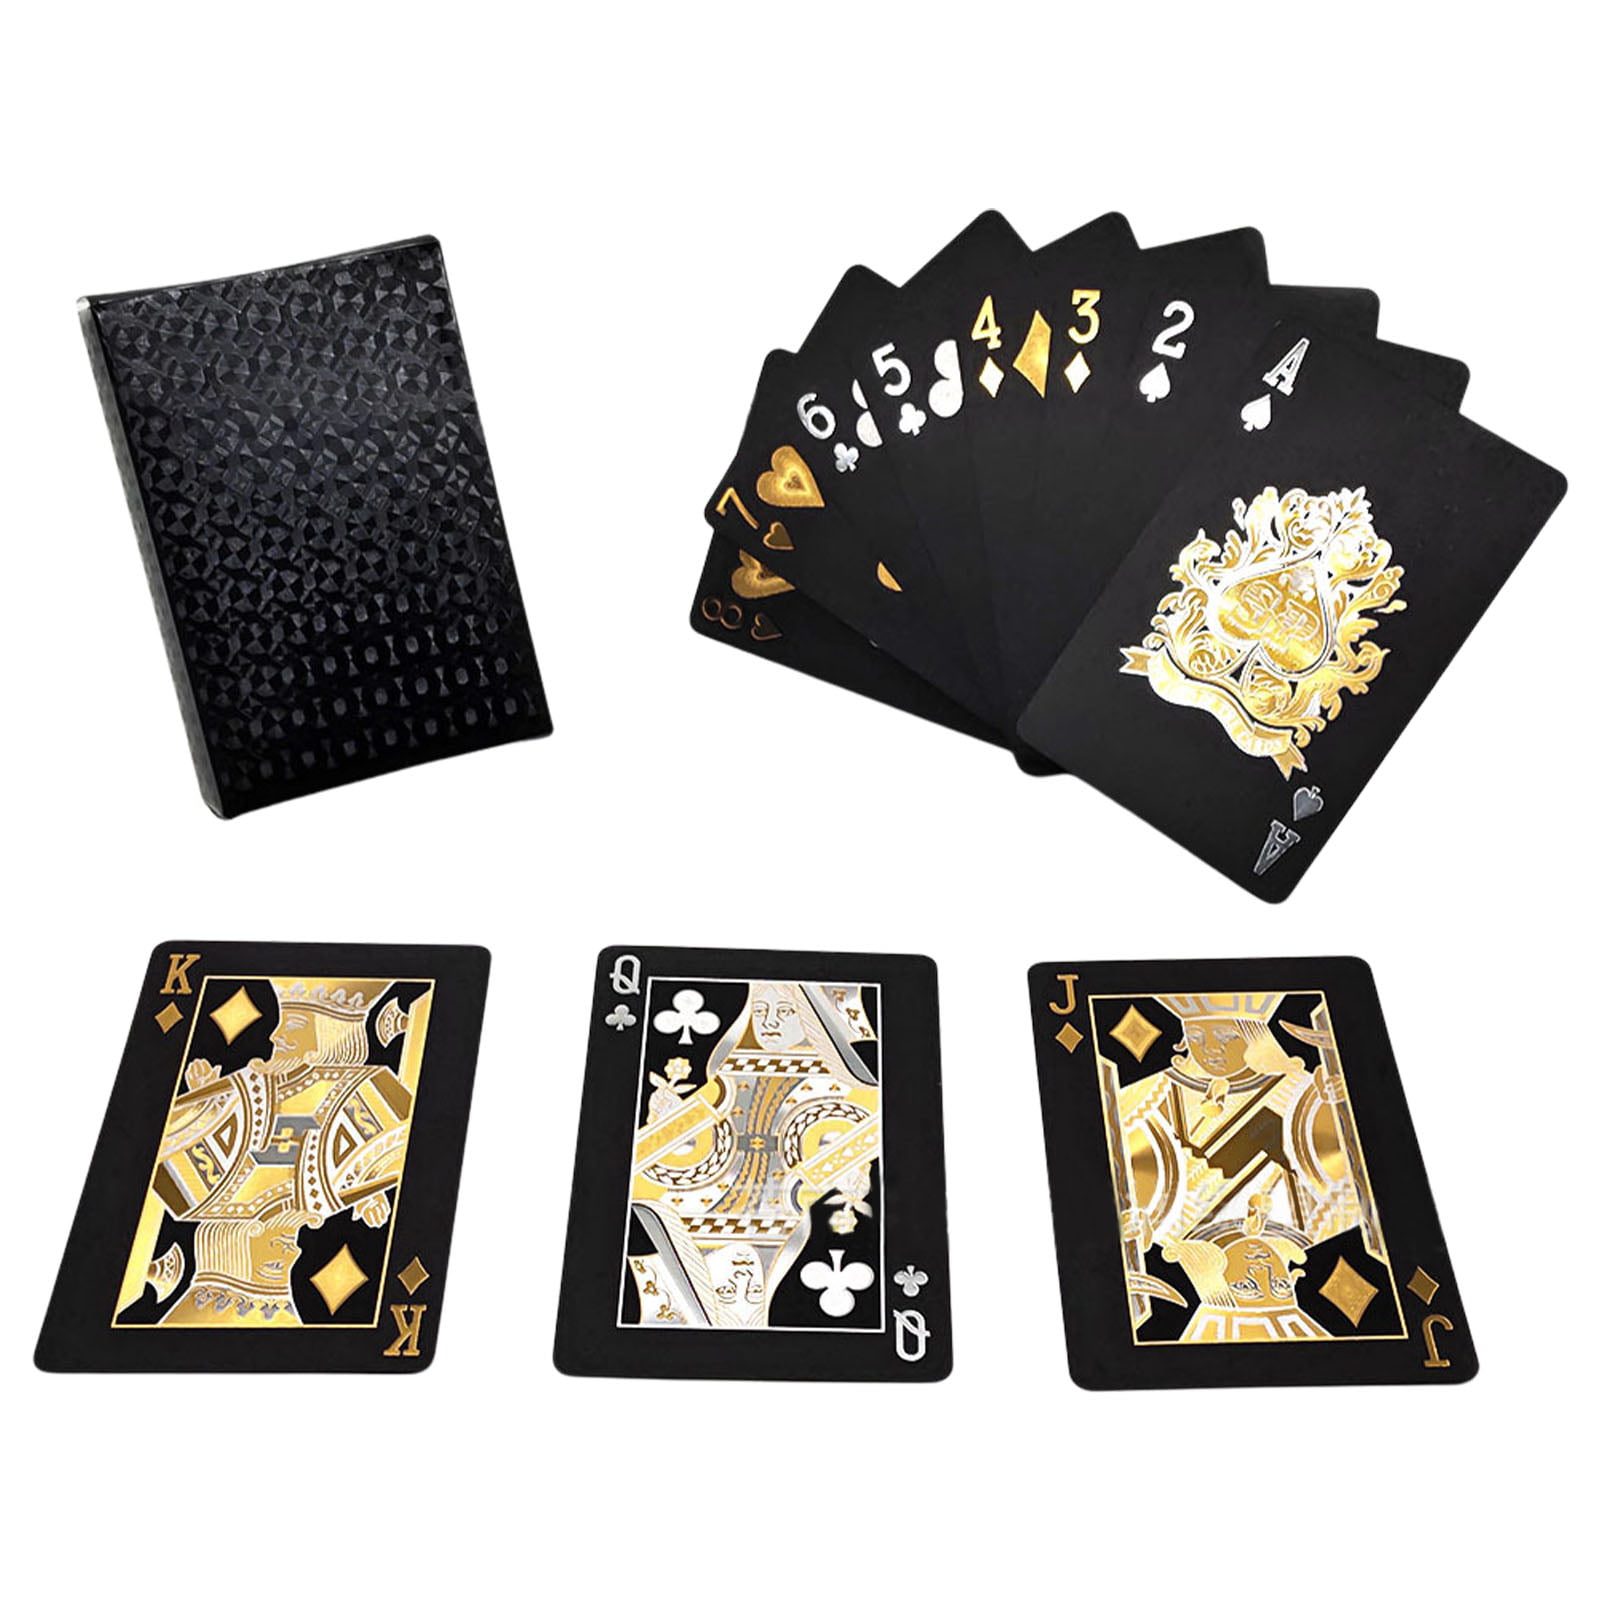 Deluxe Plastic Coated Playing Cards Deck Novelty Poker Card Games All Ages 